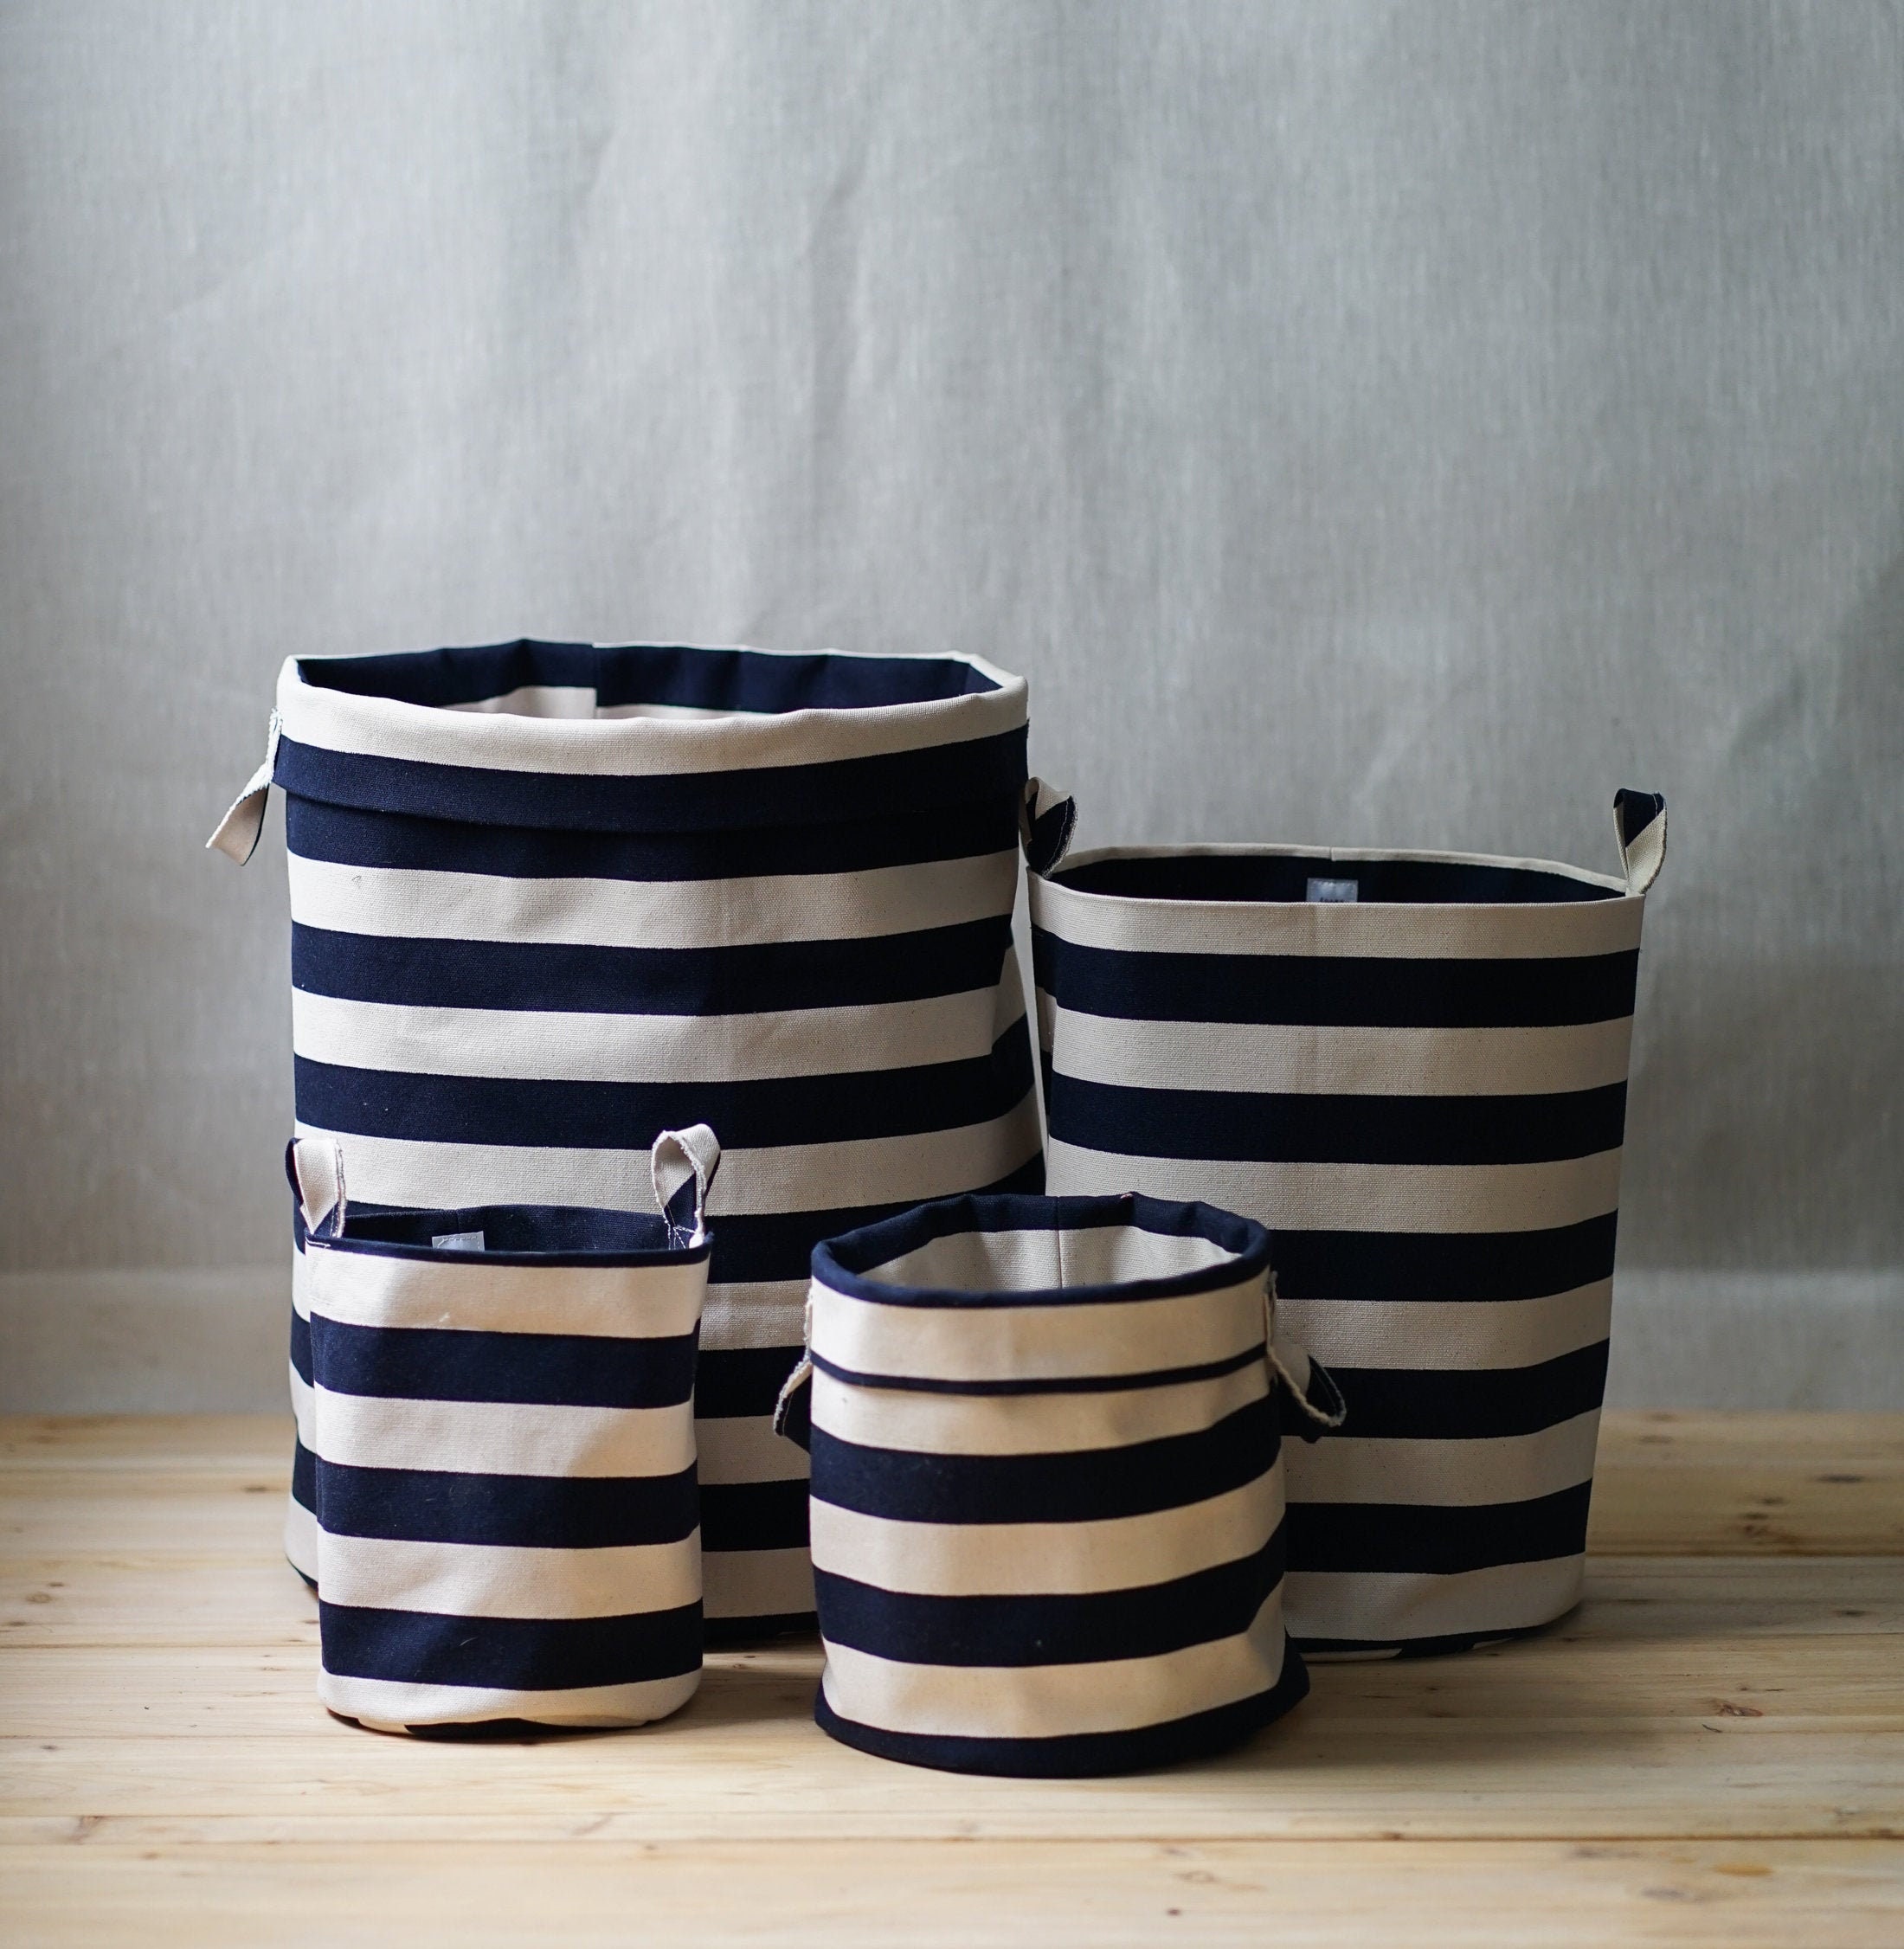 multi functional storage 12oz double sided cotton canvas bin storage fabric bins for home office home spa Navy bold stripe storage bins